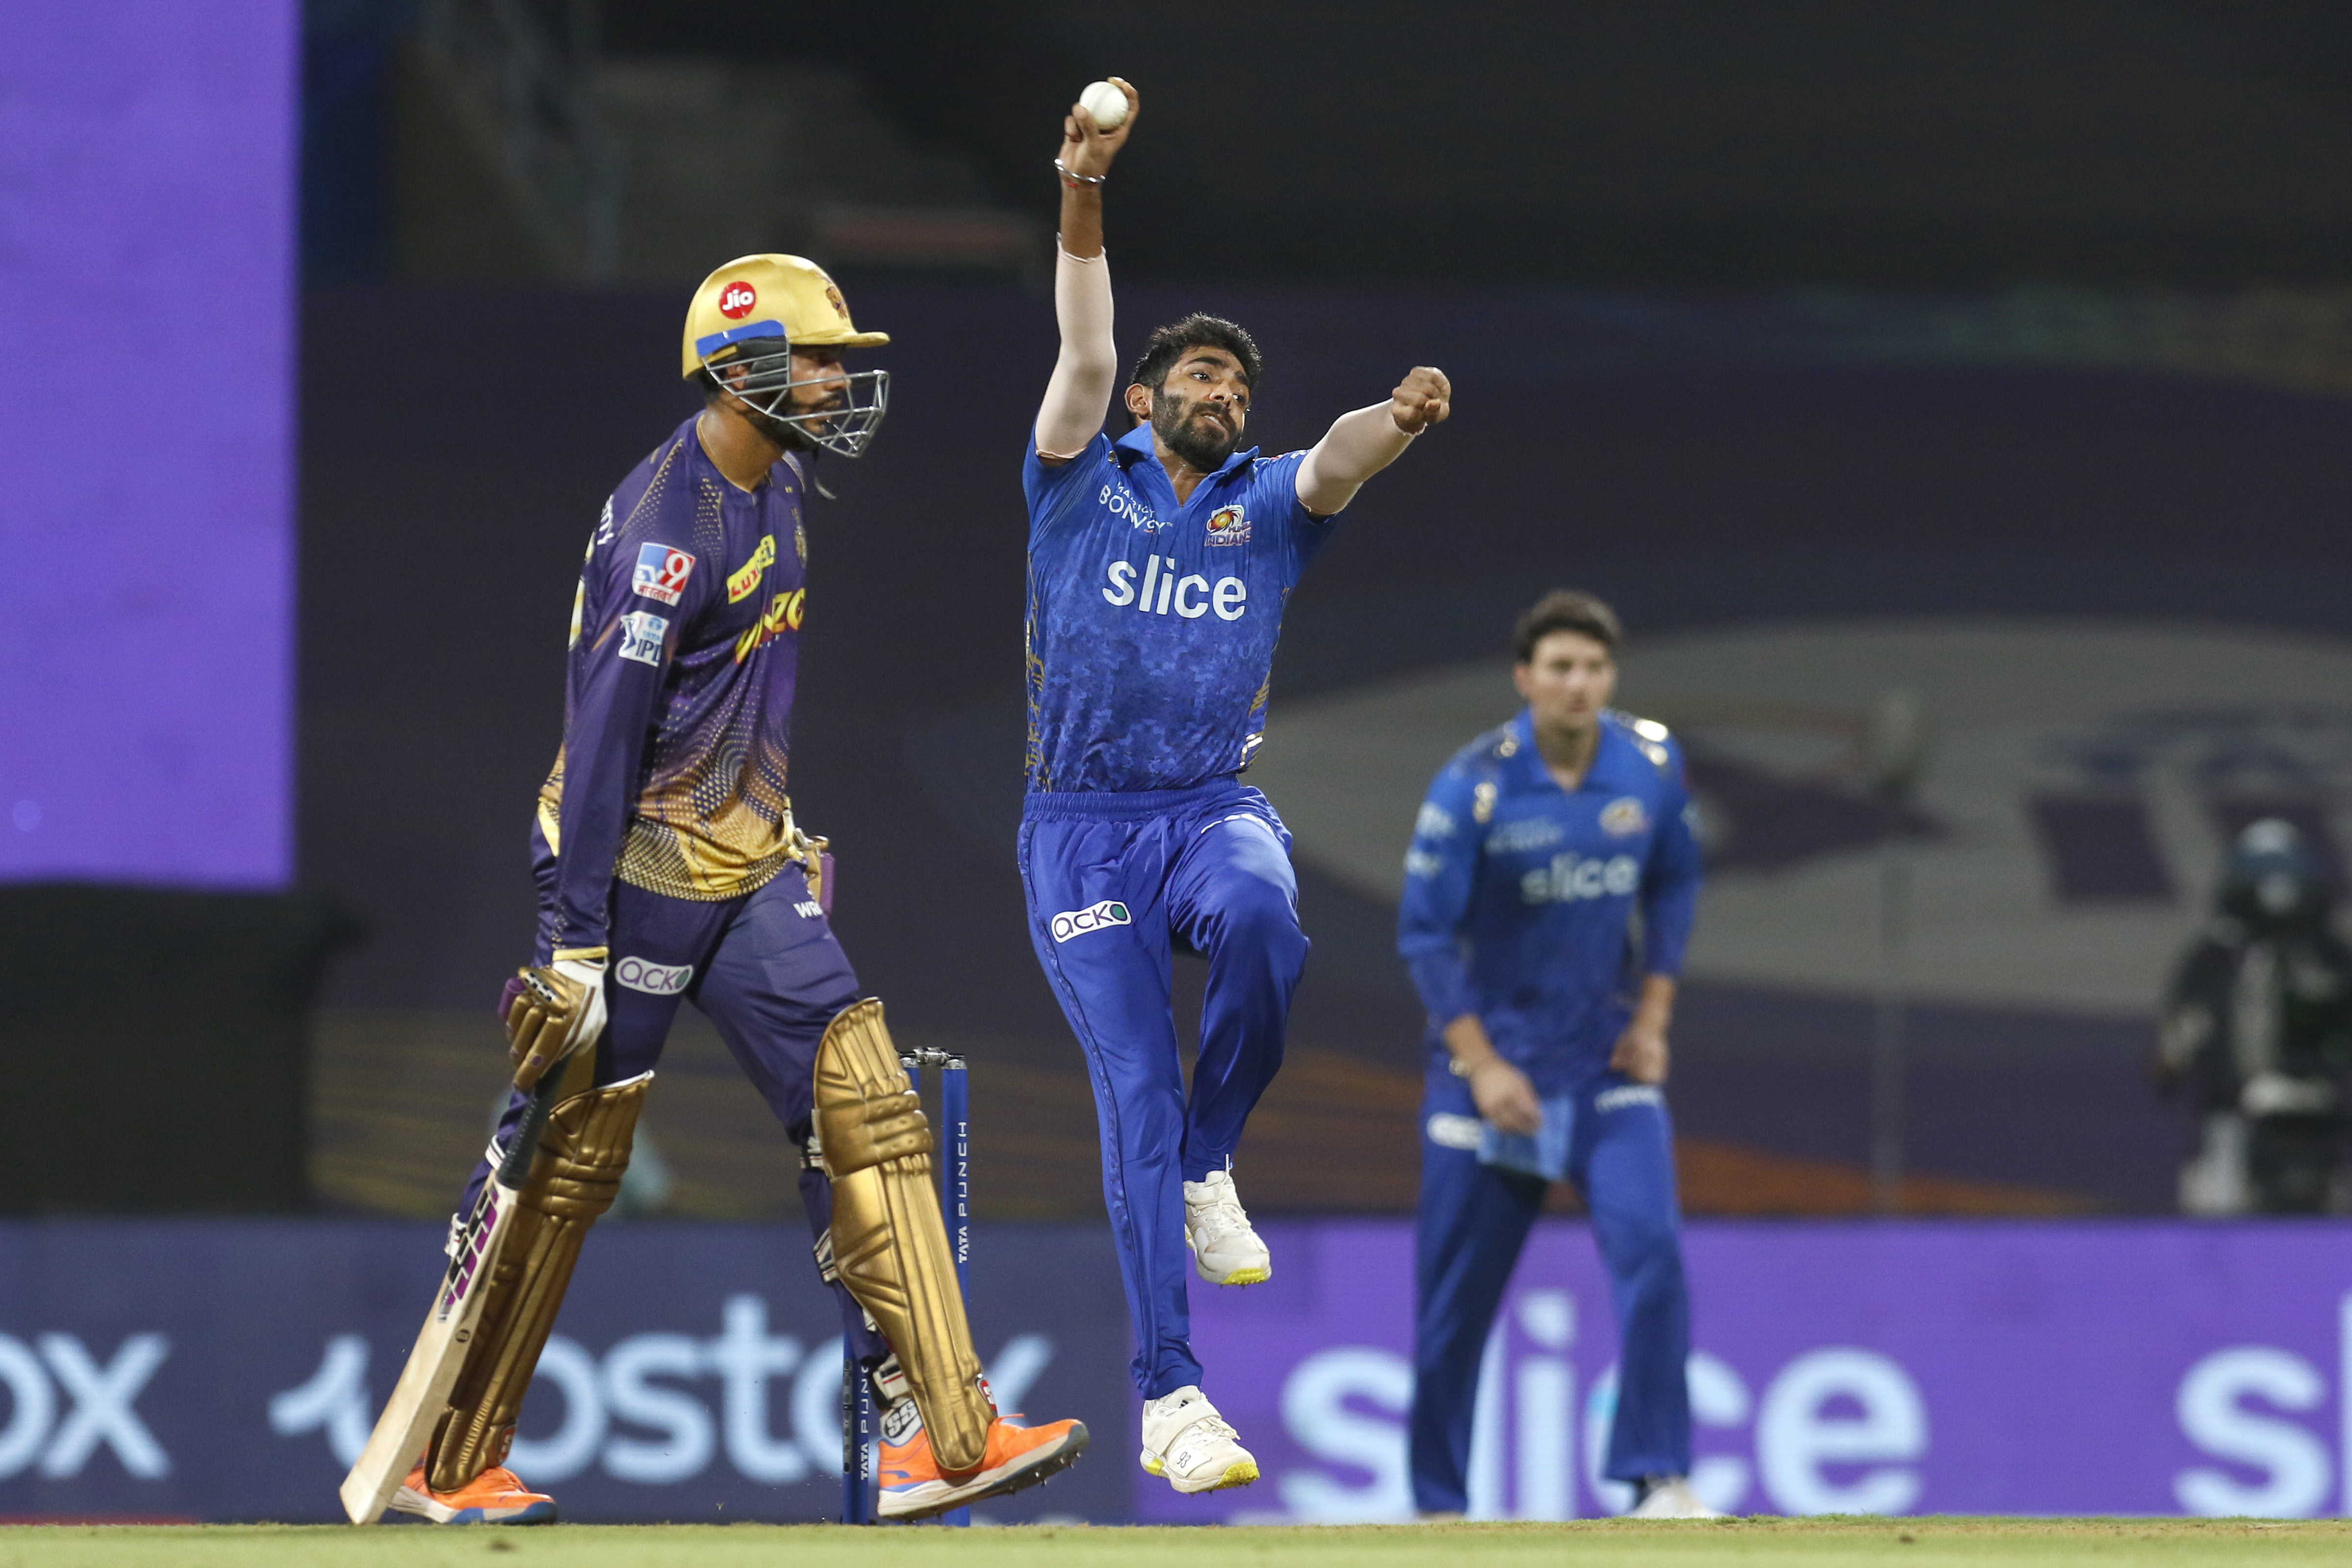 Kolkata Knight Riders live to fight another day